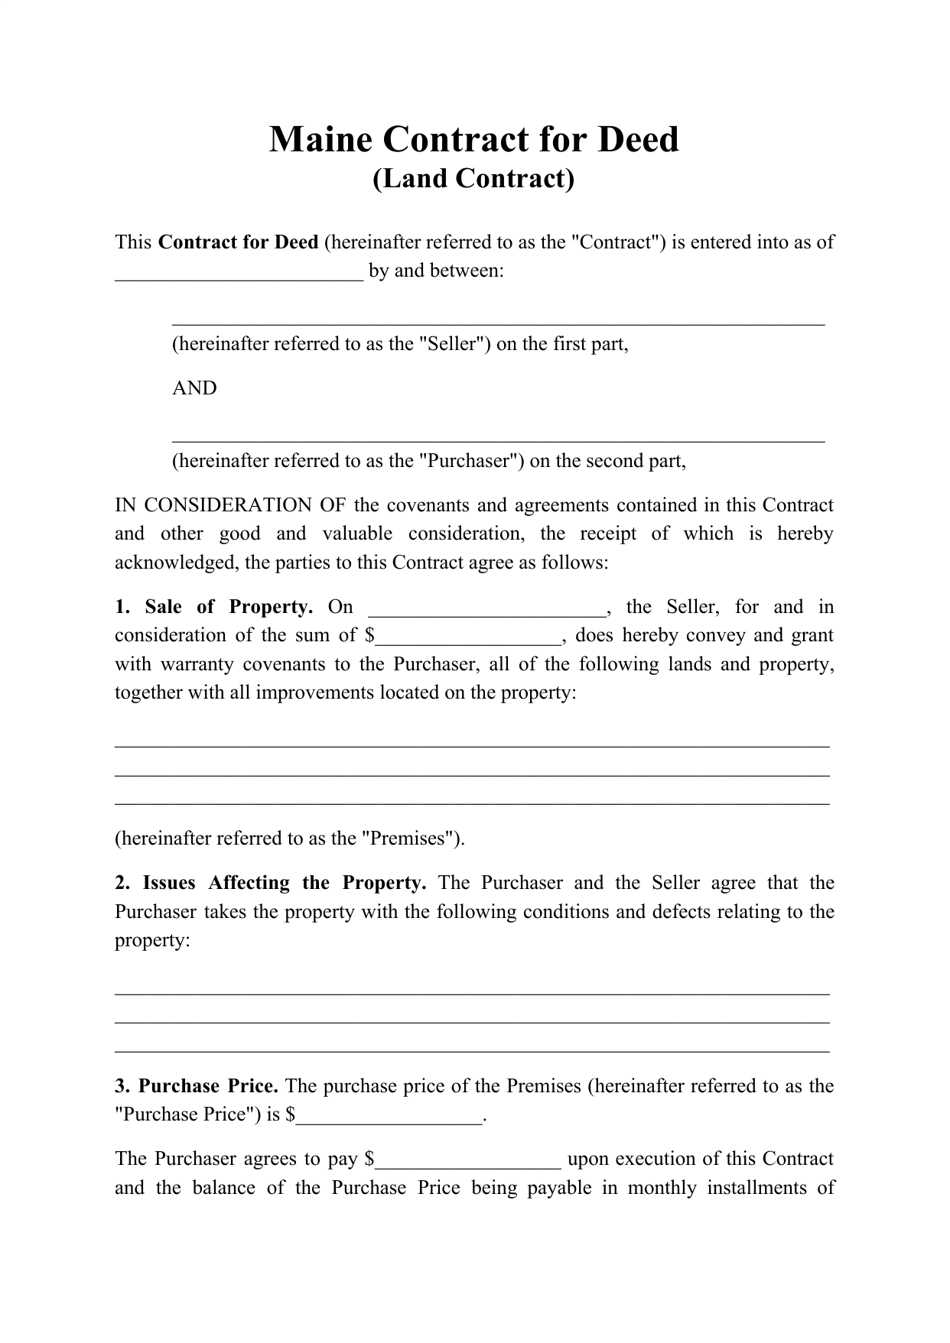 Contract for Deed (Land Contract) - Maine, Page 1